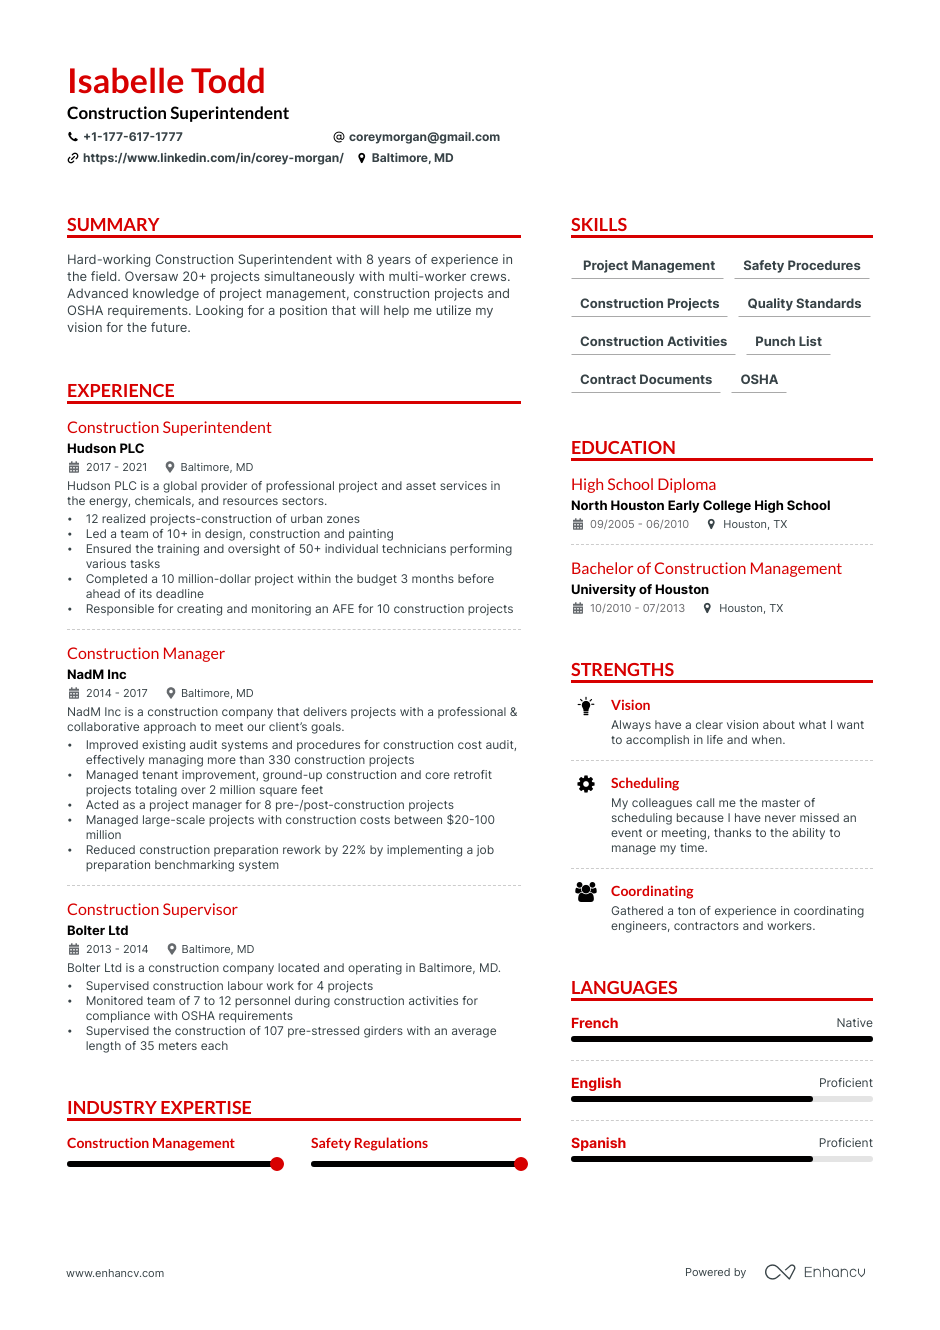 5 Construction Superintendent Resume Examples Guide for 2023